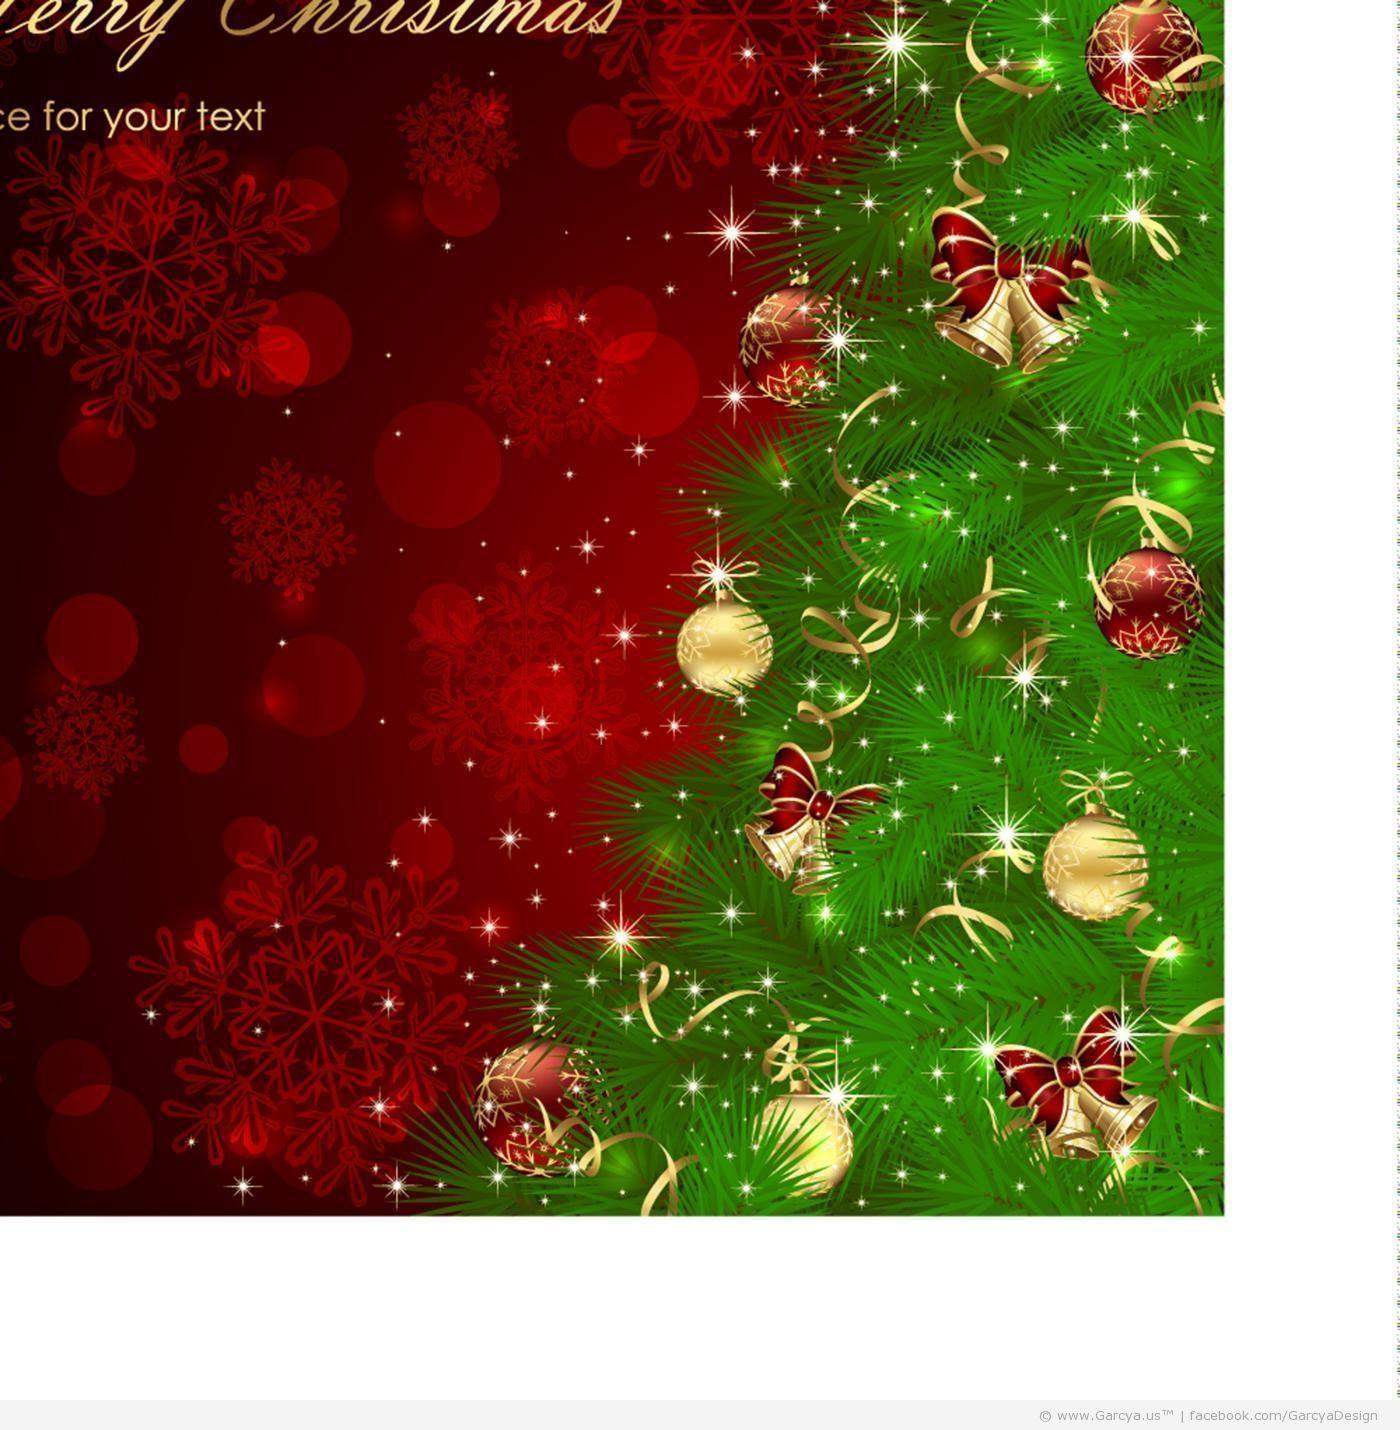 Free Vector Background with Christmas Theme Design Blog